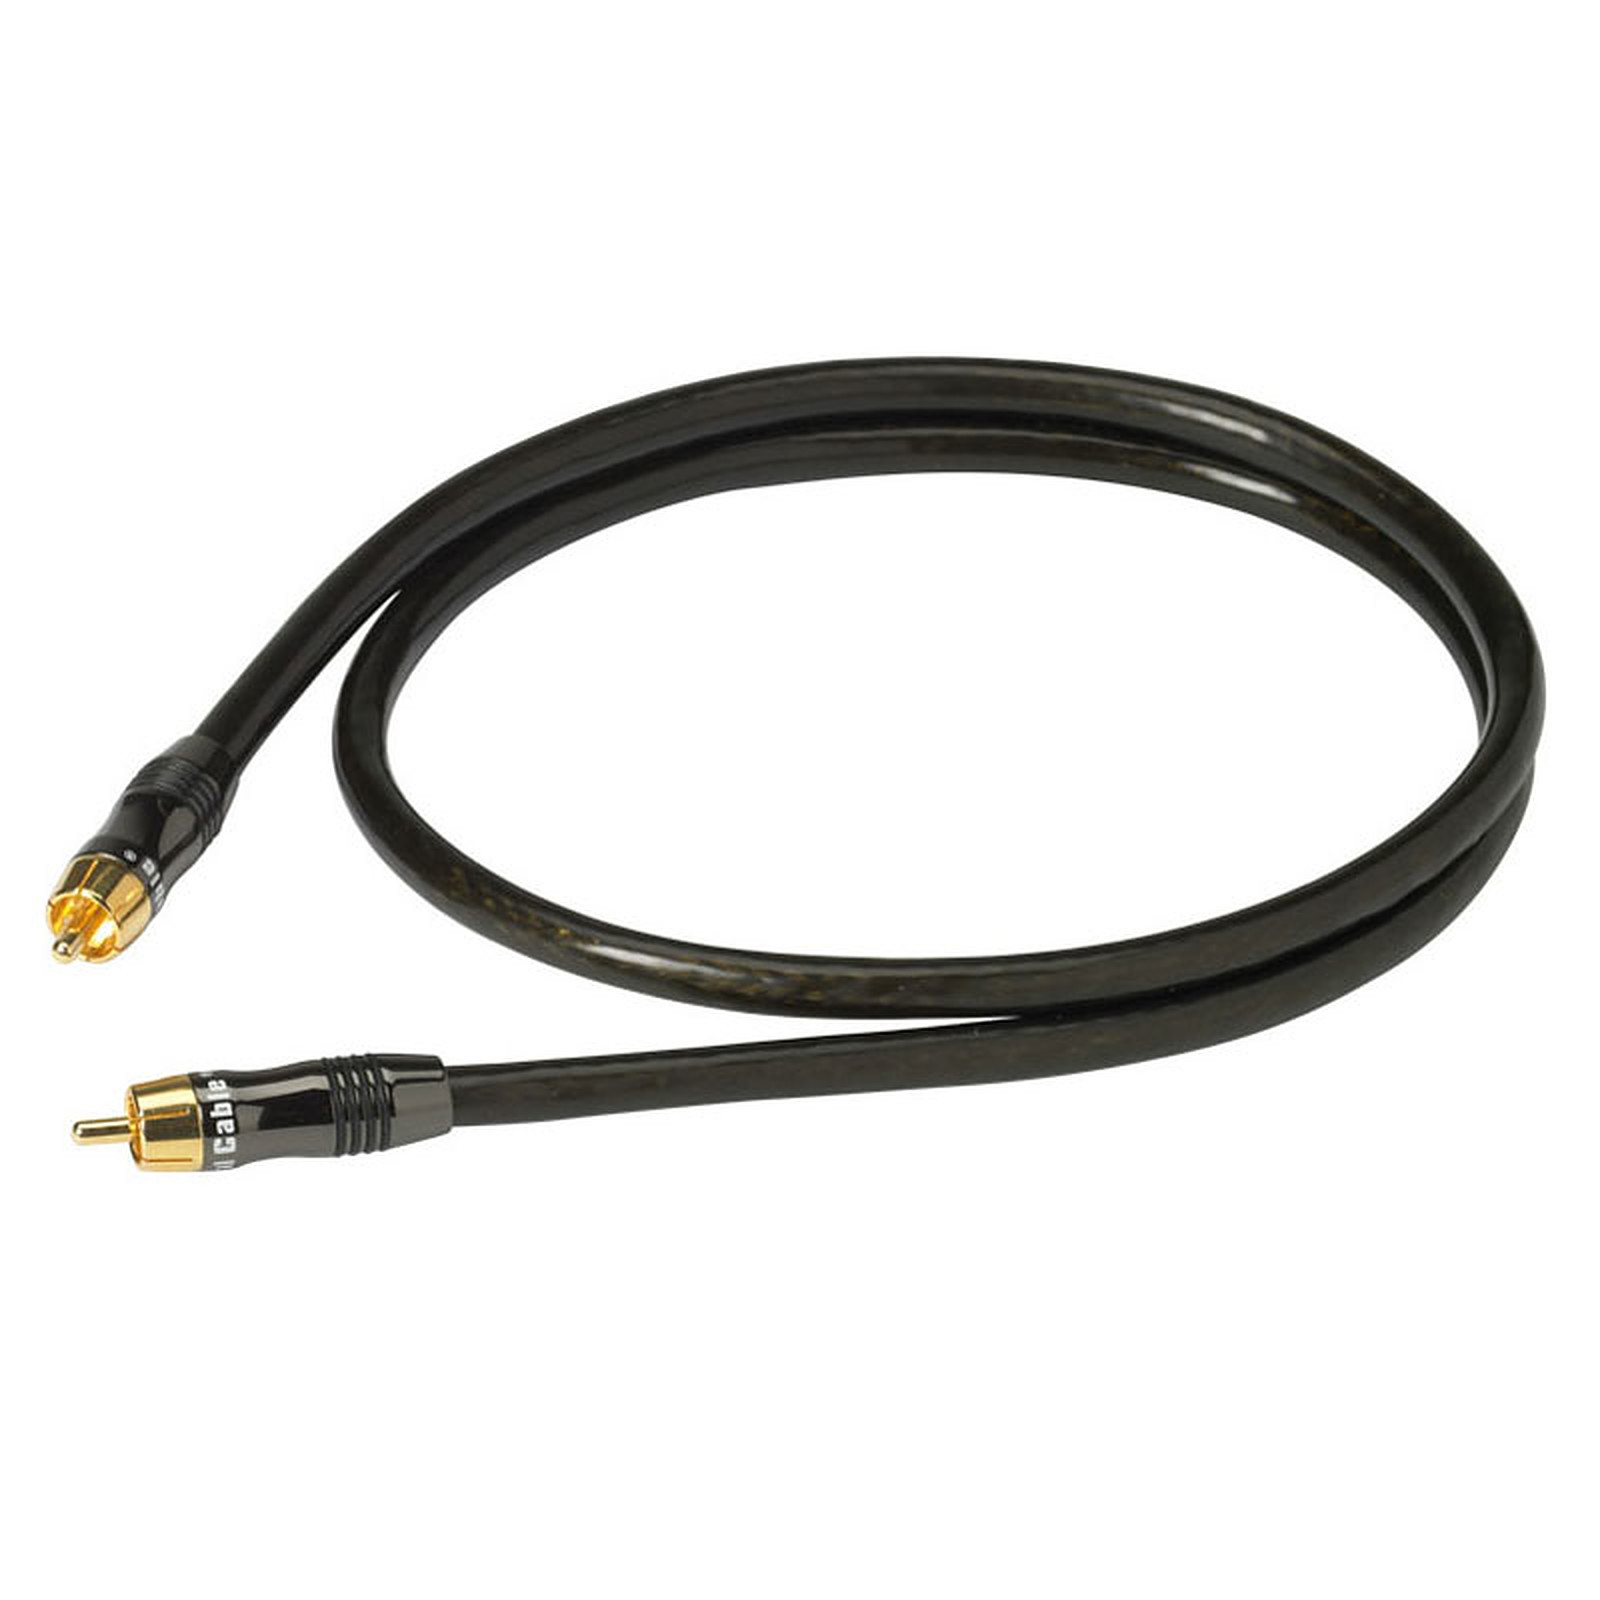 Real Cable E-SUB-2 5m - Cable audio RCA Real Cable